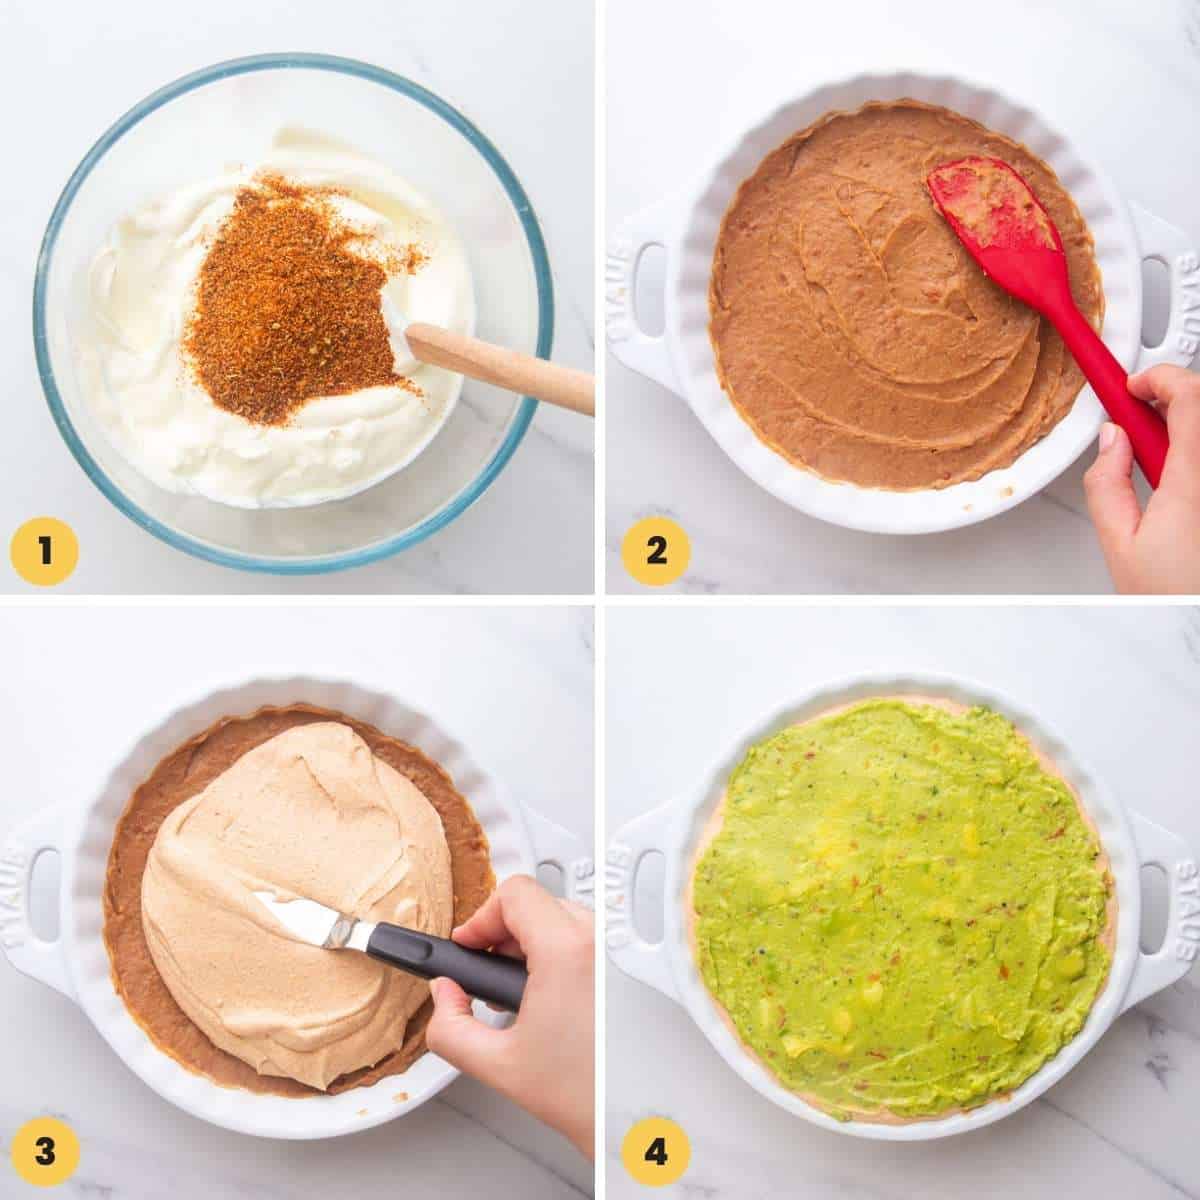 four images showing how to make a layered taco dip with beans, cream cheese, and guacamole